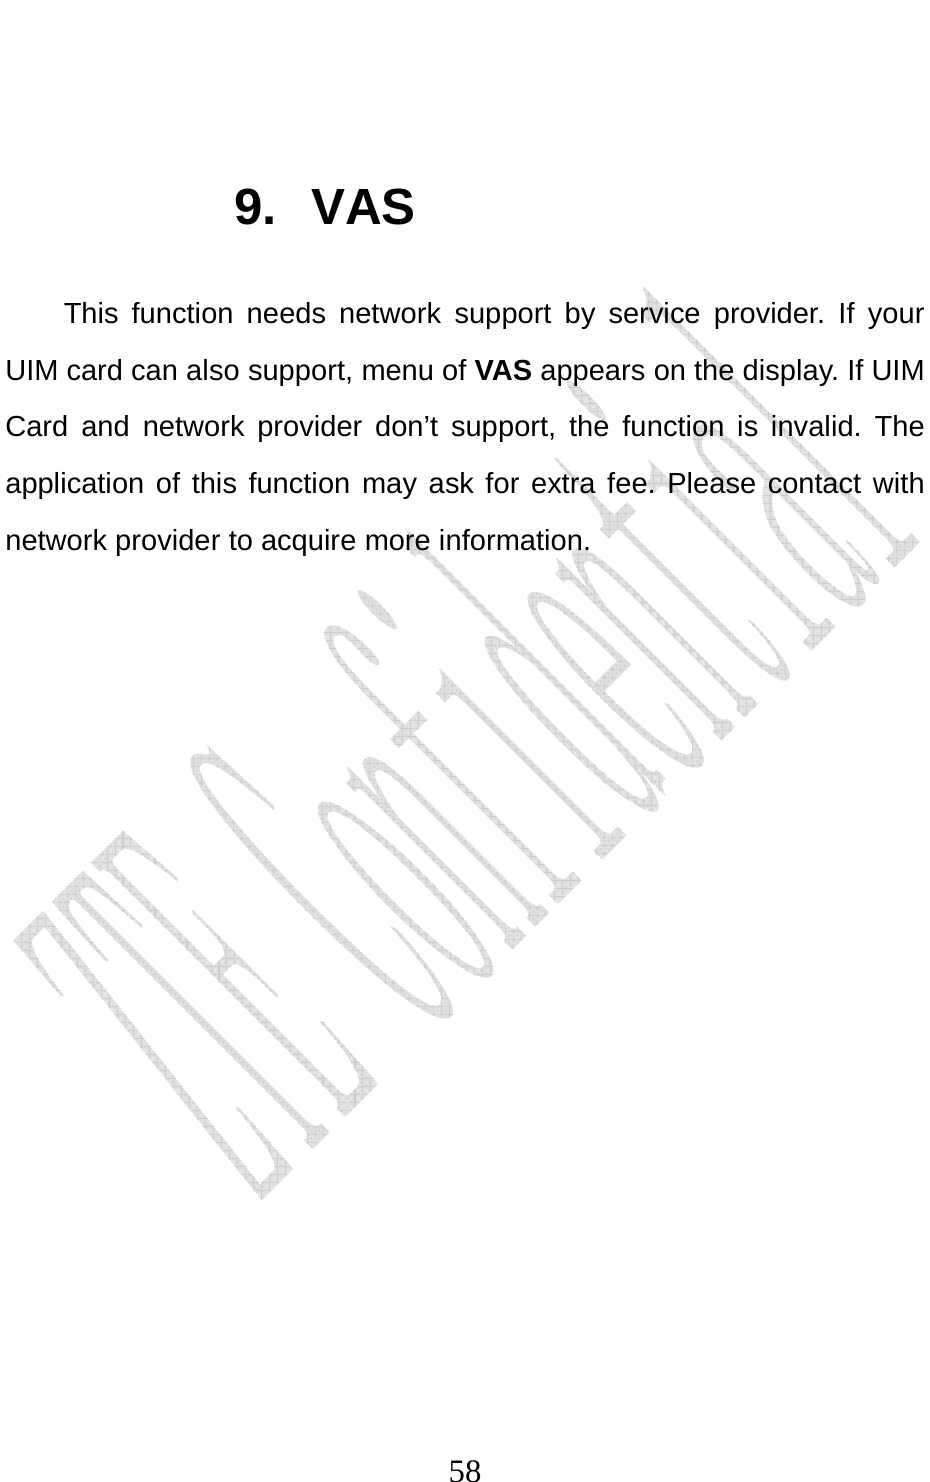                              58 9. VAS This function needs network support by service provider. If your UIM card can also support, menu of VAS appears on the display. If UIM Card and network provider don’t support, the function is invalid. The application of this function may ask for extra fee. Please contact with network provider to acquire more information.    